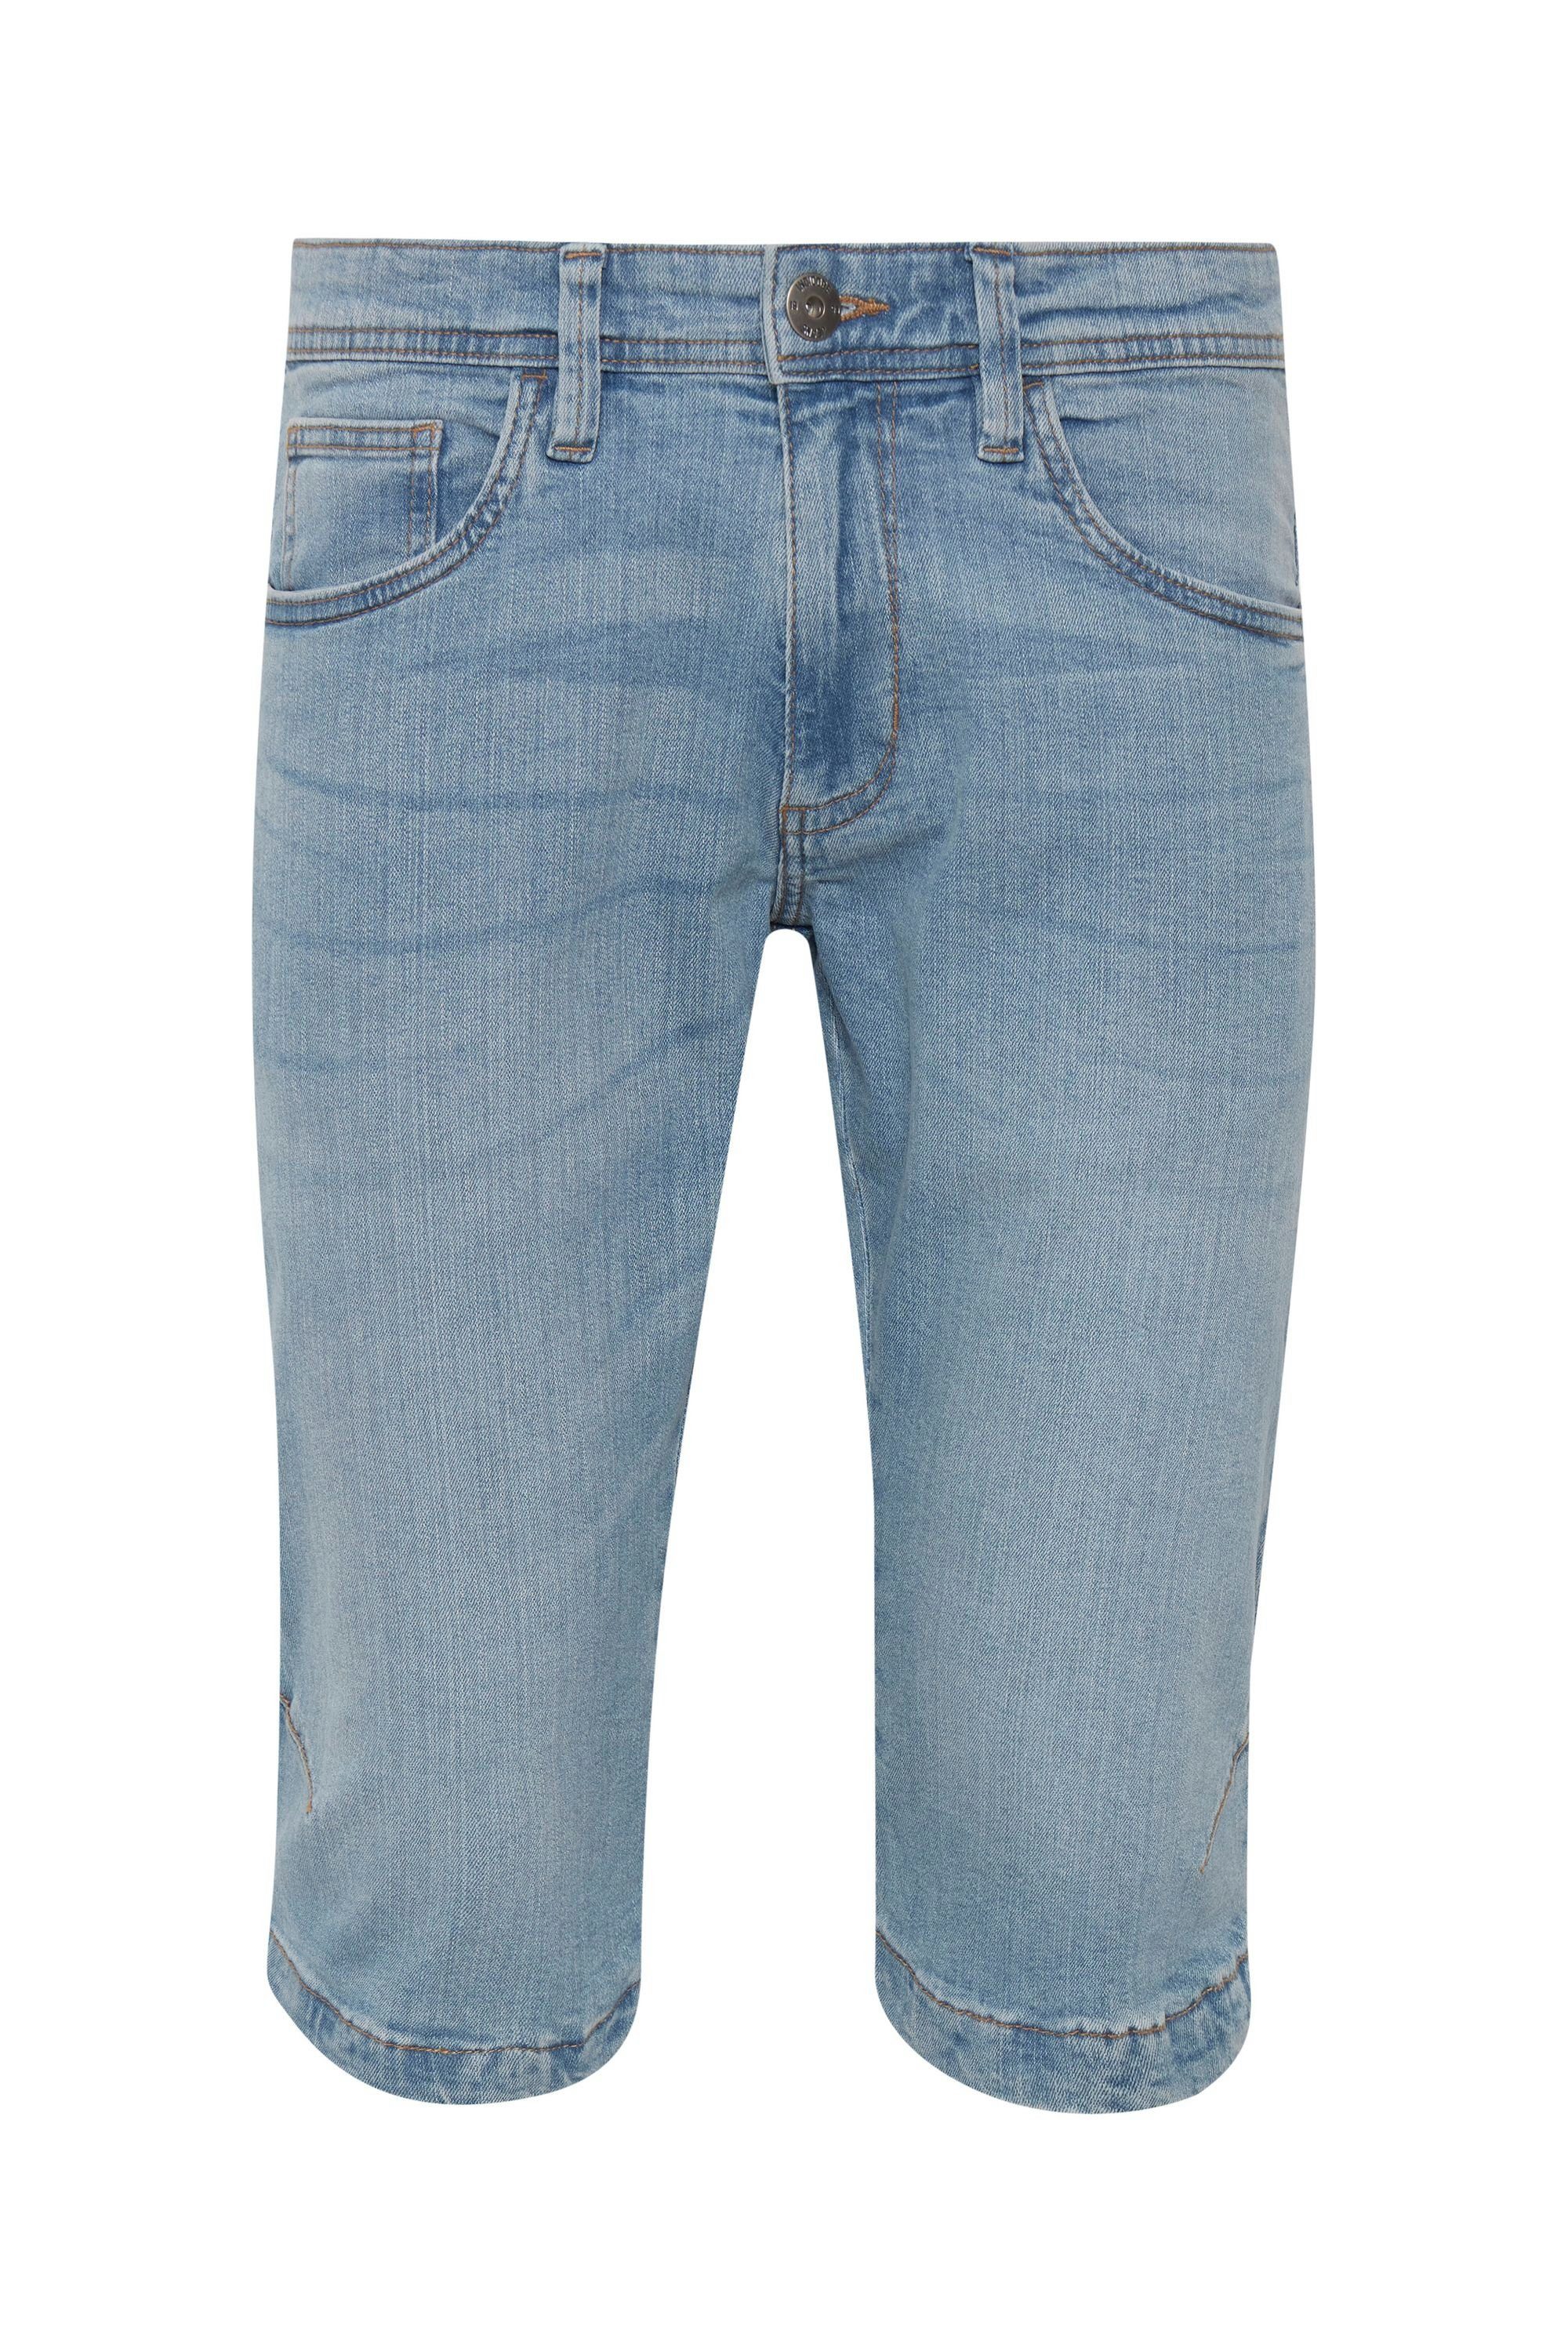 Indicode Jeansshorts IDQuince Blue Wash (1014)